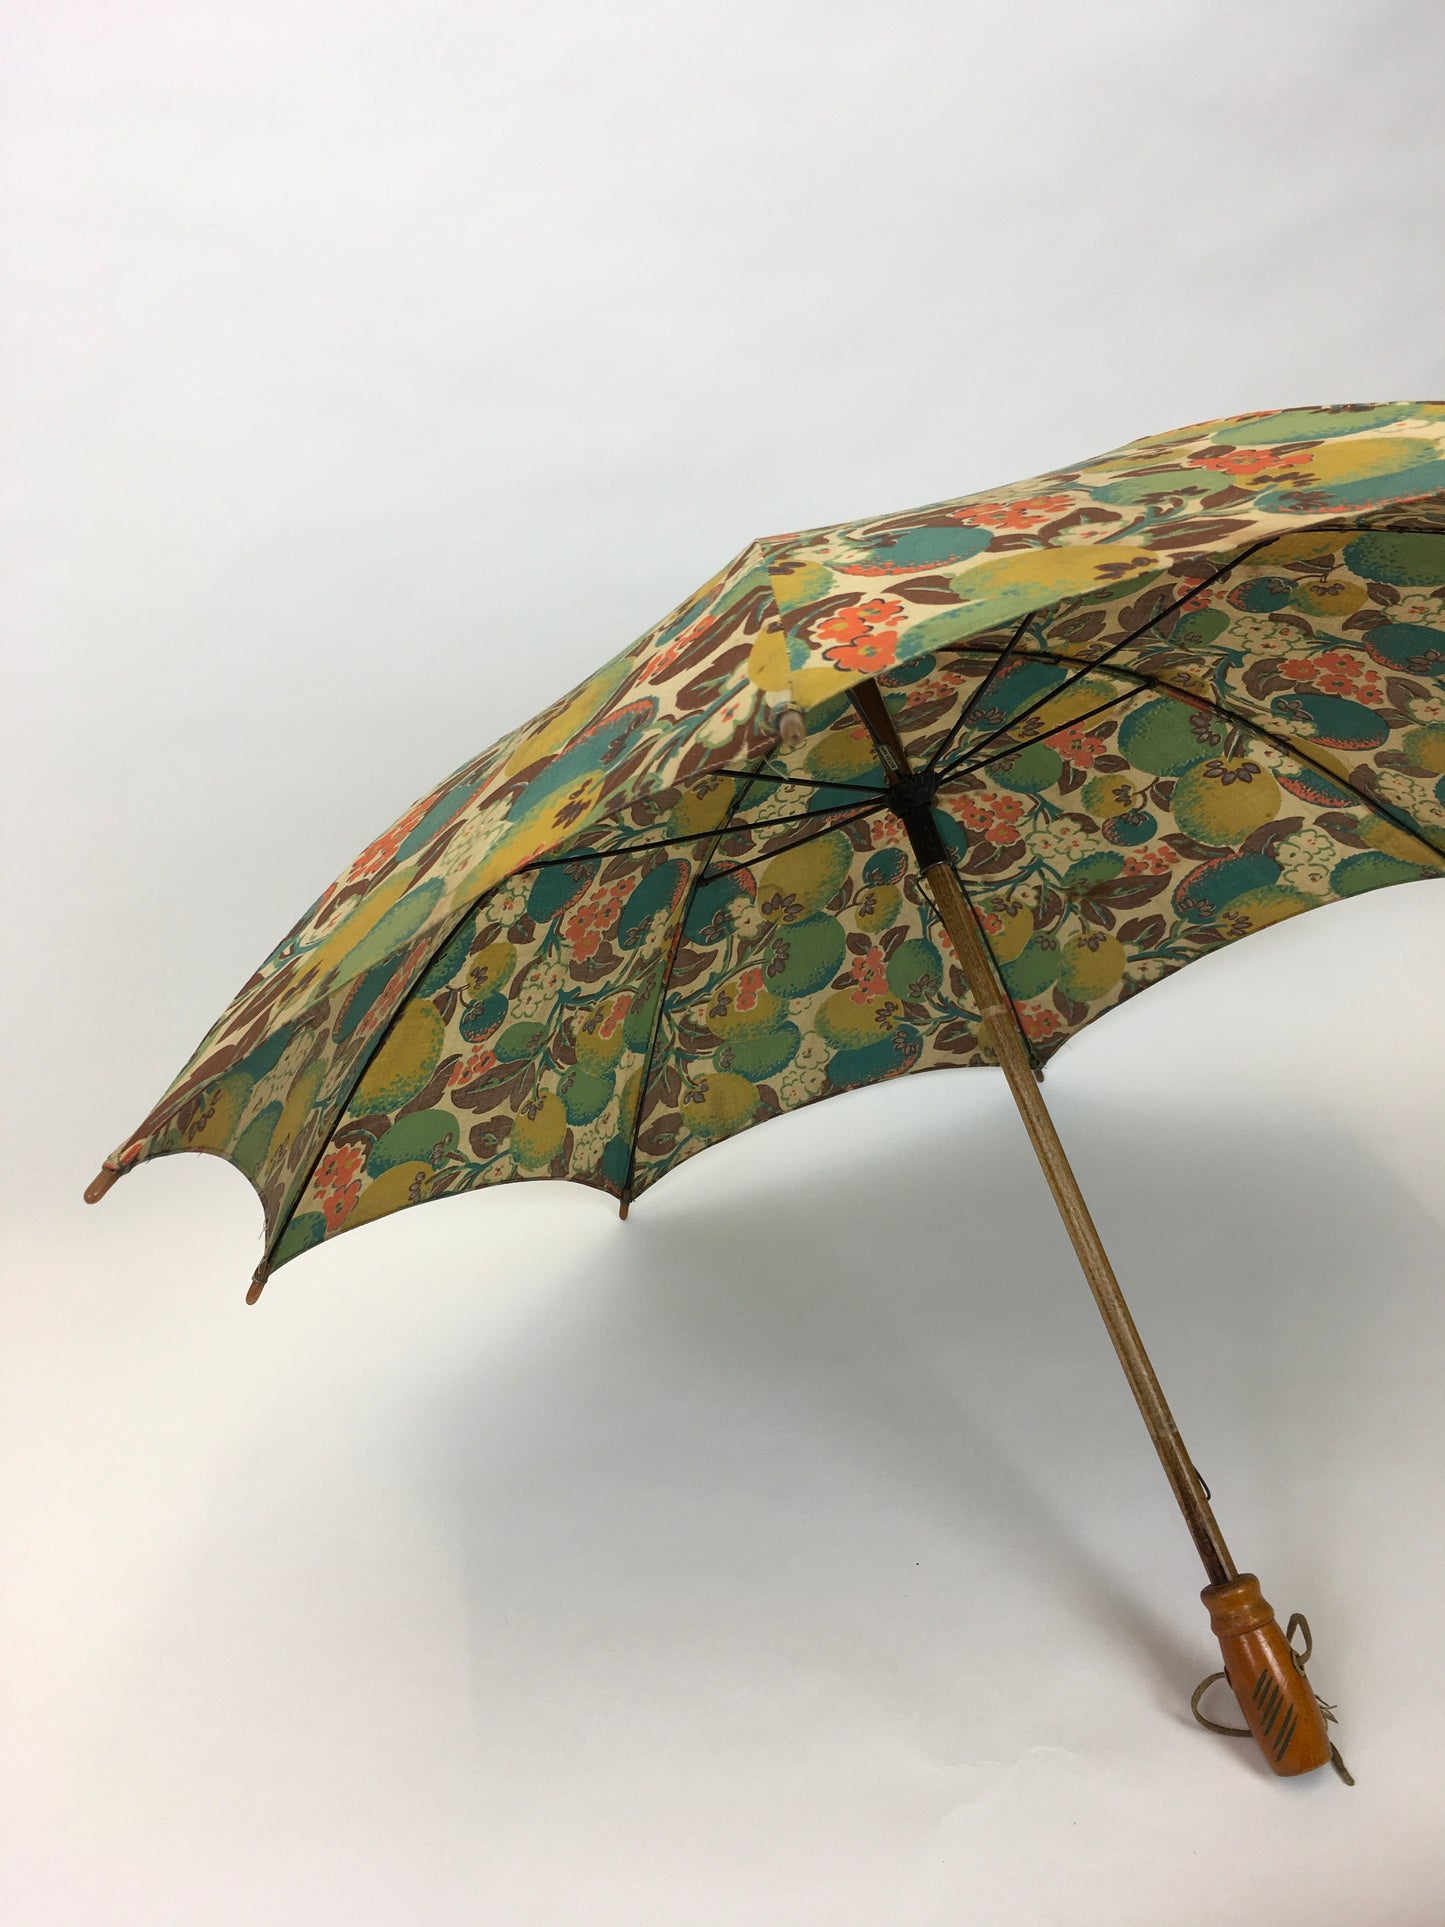 Original 1930s Sun Parasol in a Stunning Floral and Fruit Cotton - In Deco Oranges, Greens, Chartreuse and Teal